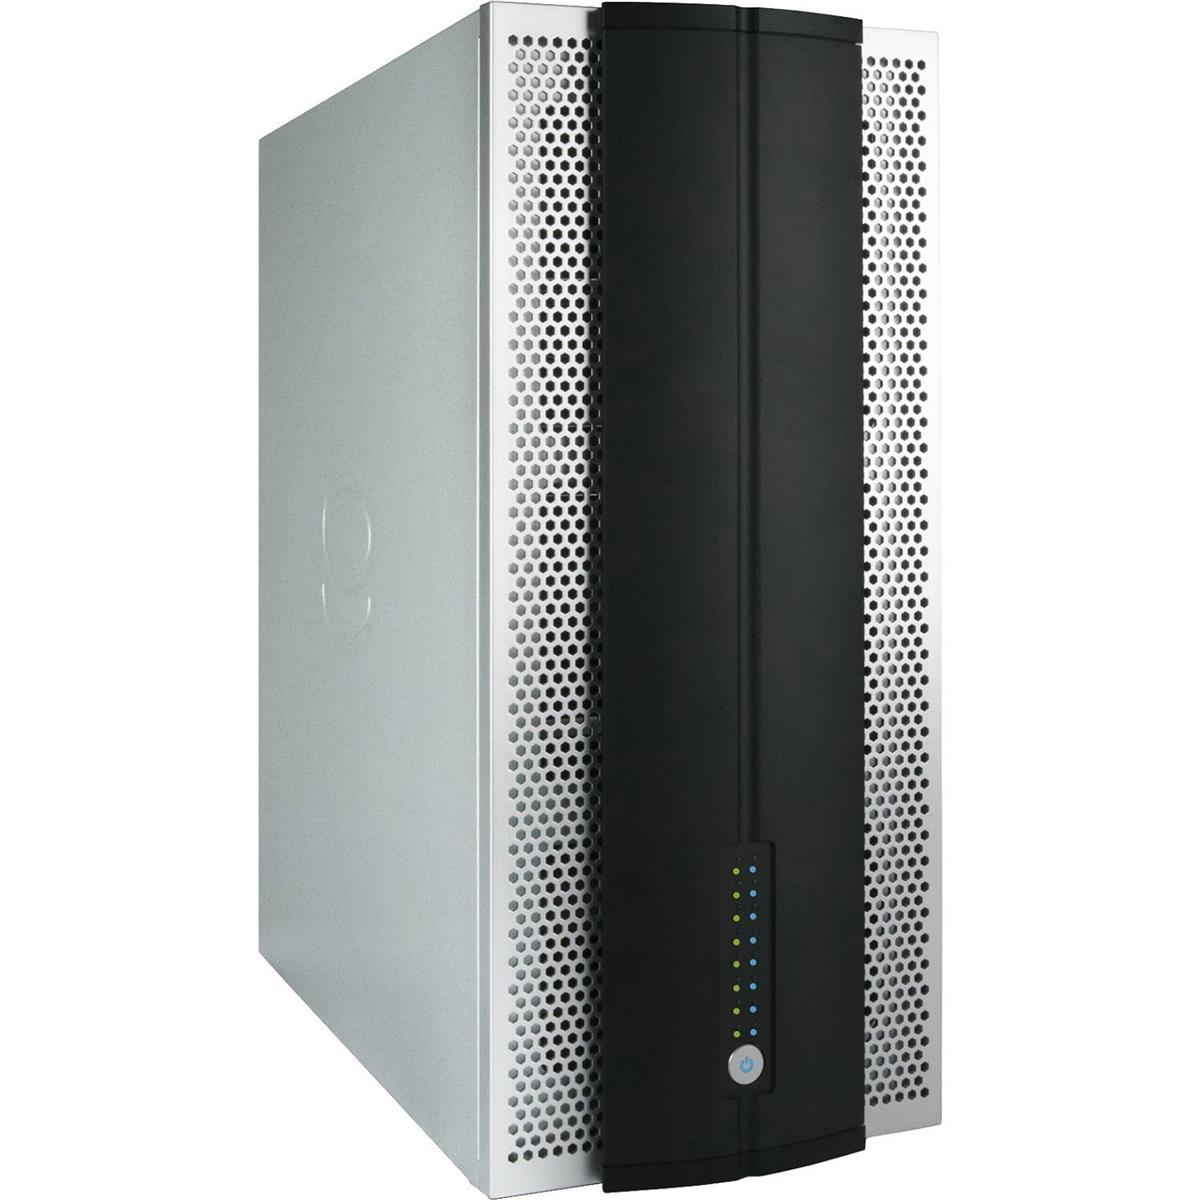 Image of Accusys T-Share A12T3-SHARE+ 12-Bay Thunderbolt Storage